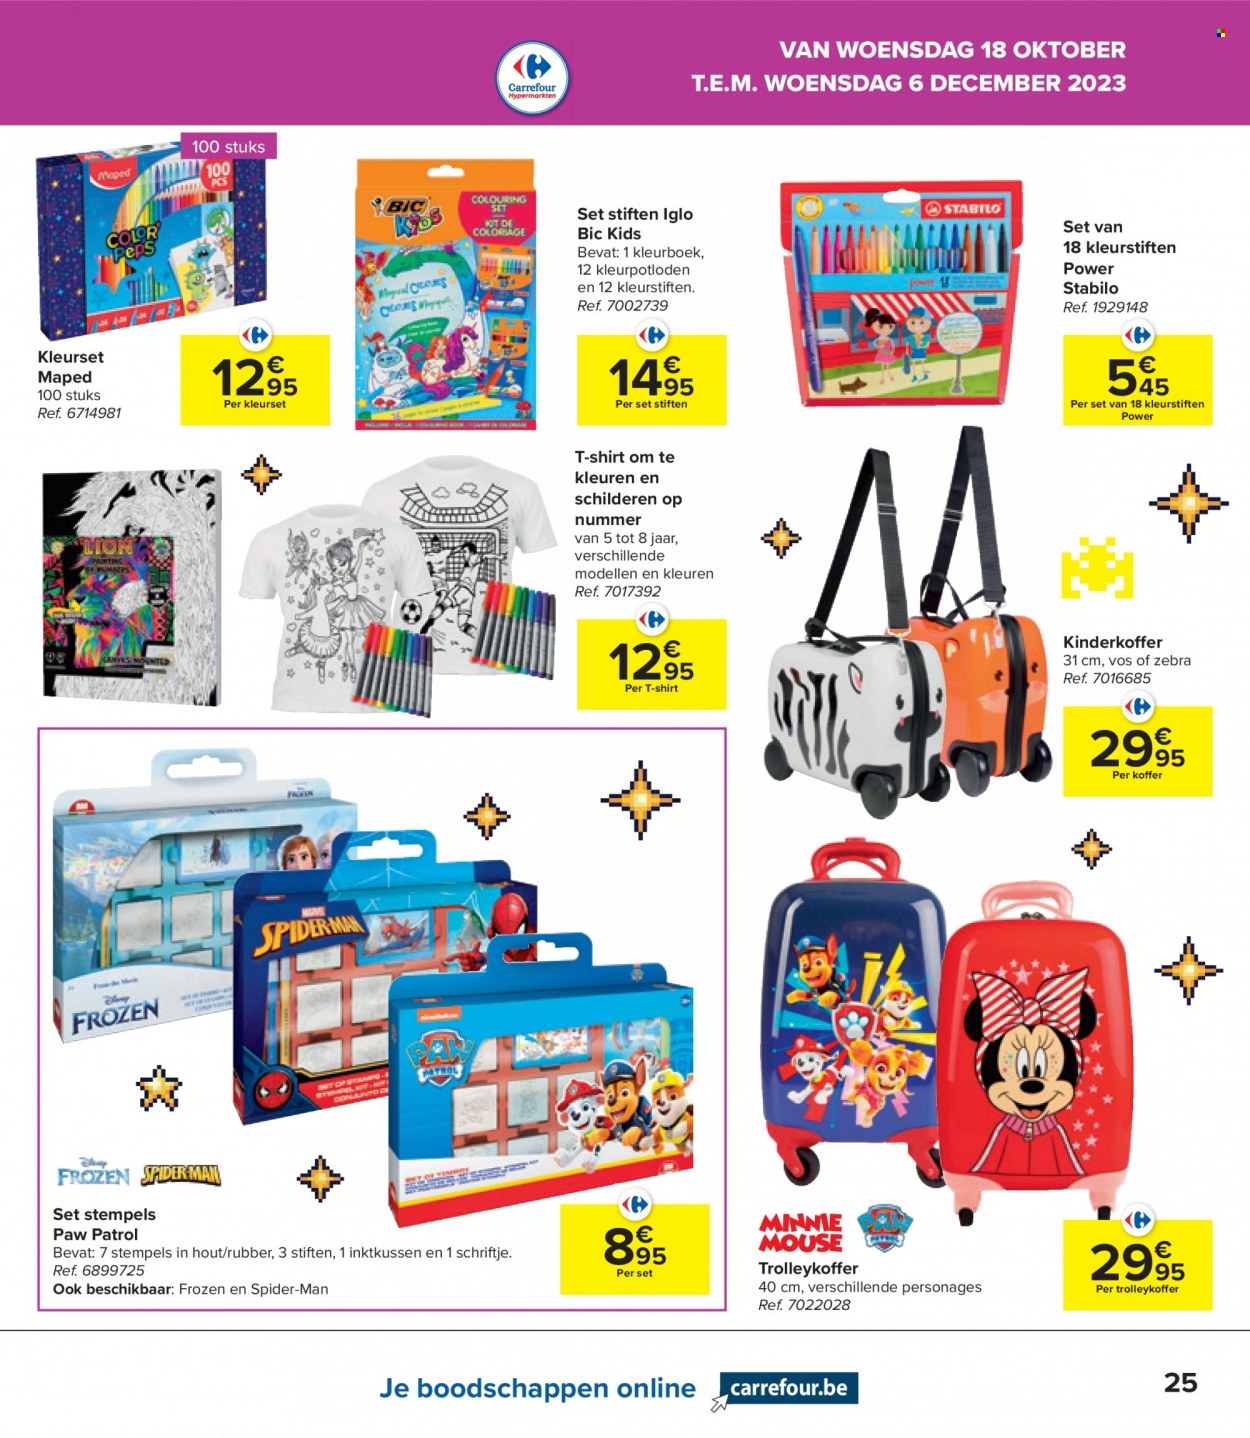 Catalogue Carrefour hypermarkt - 18.10.2023 - 6.12.2023. Page 25.